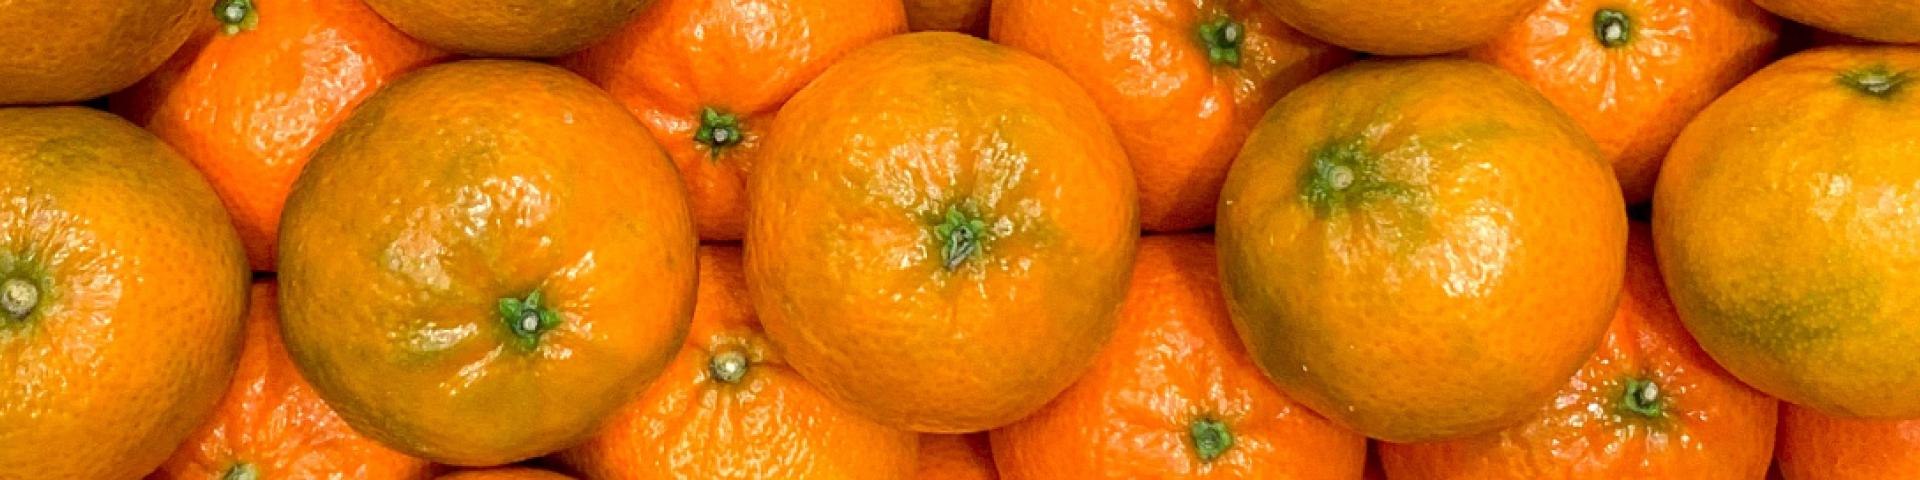 Market basket: Tiny clementines perfect for snacks, recipes